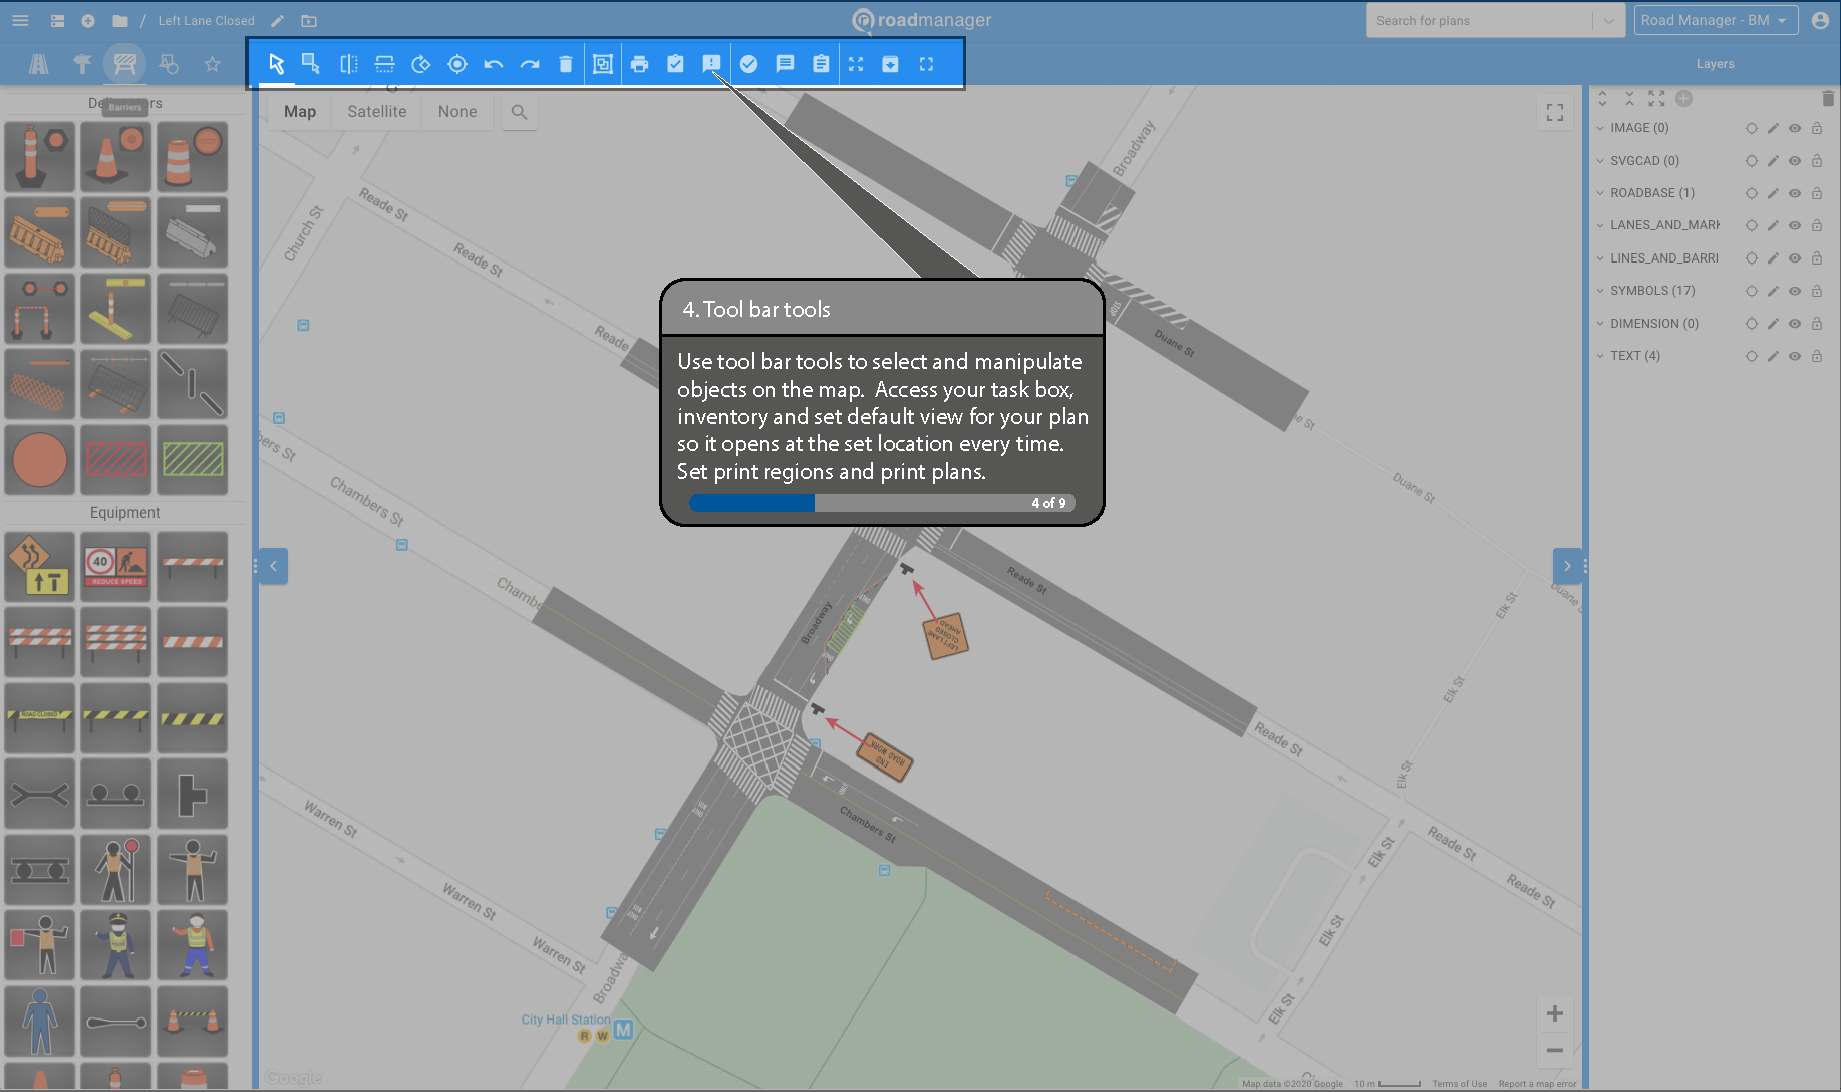 Use bar tools to select and manipulate objects on the map.